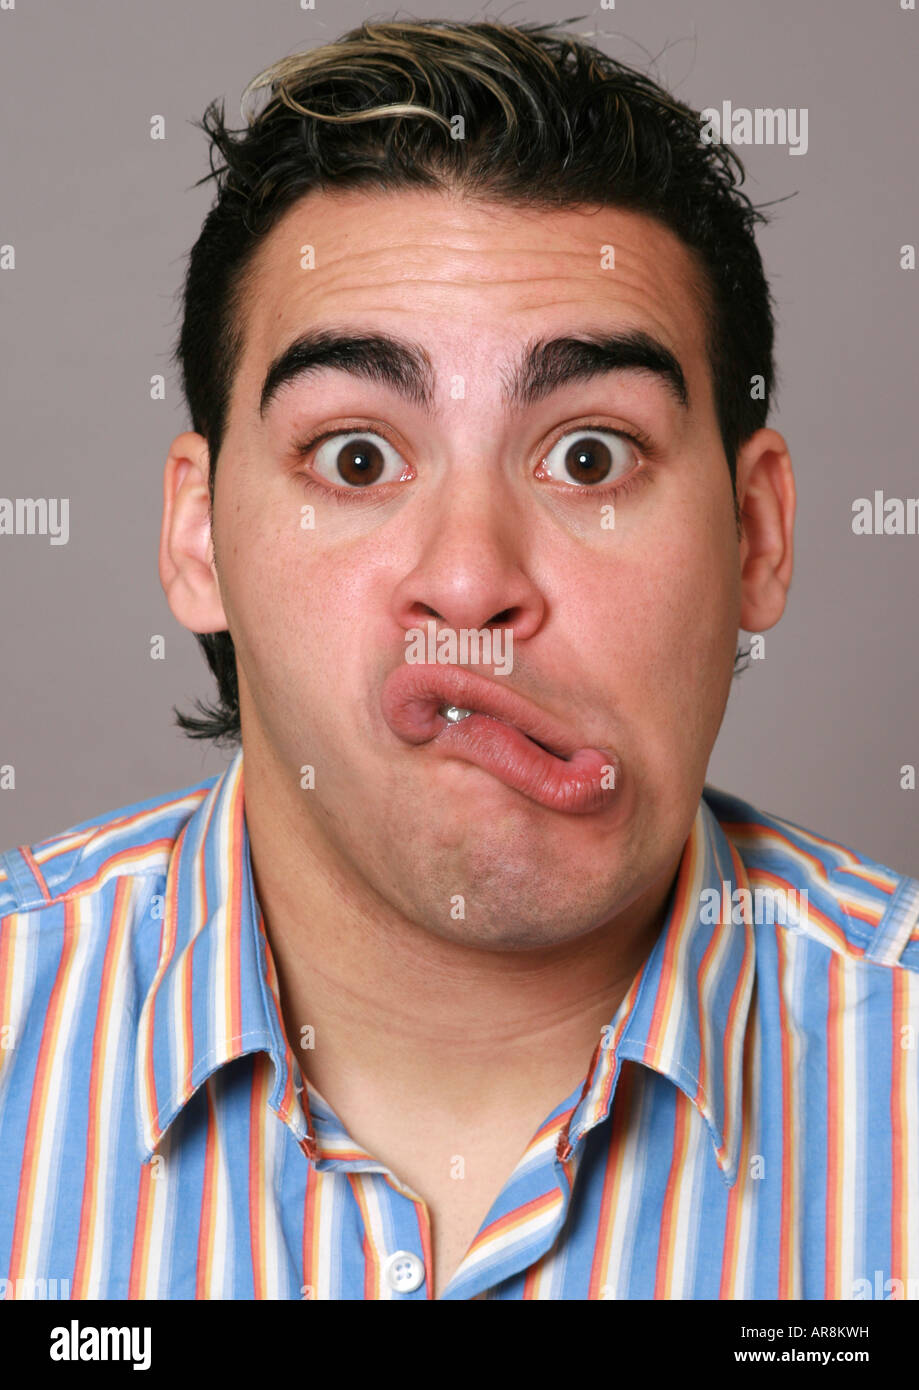 young man with a funny face Stock Photo